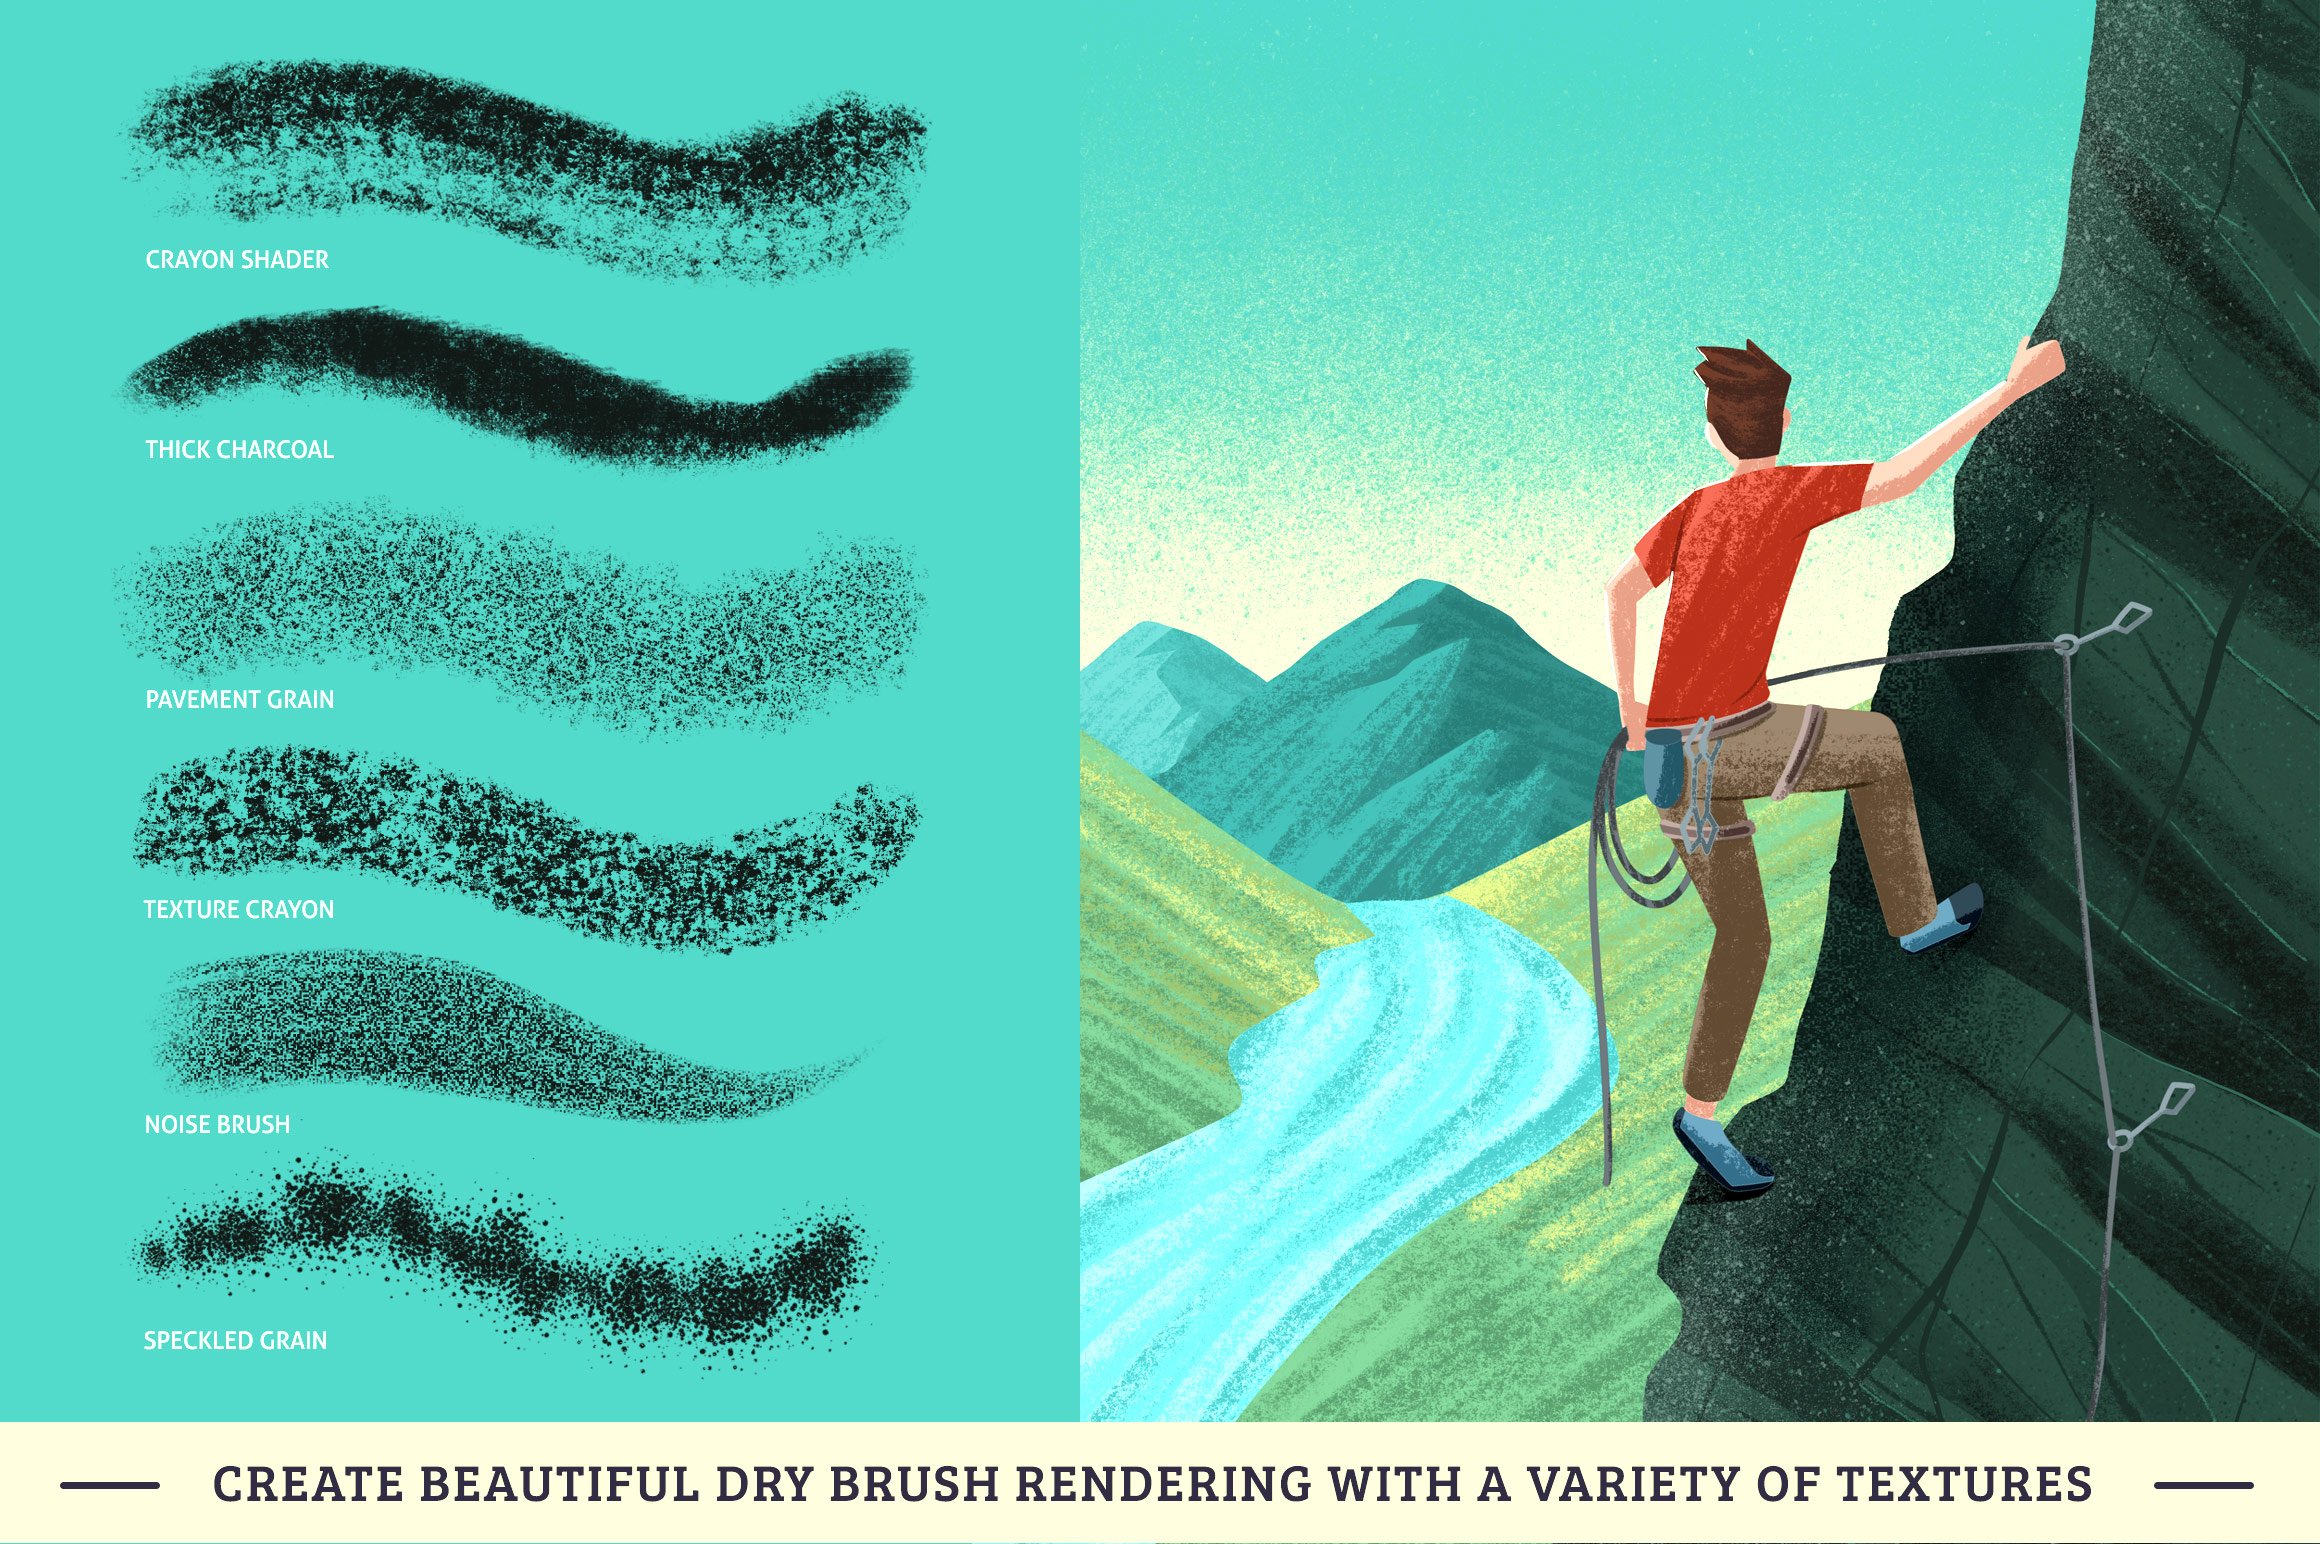 Create beautiful dry brush rendering with a variety of textures.